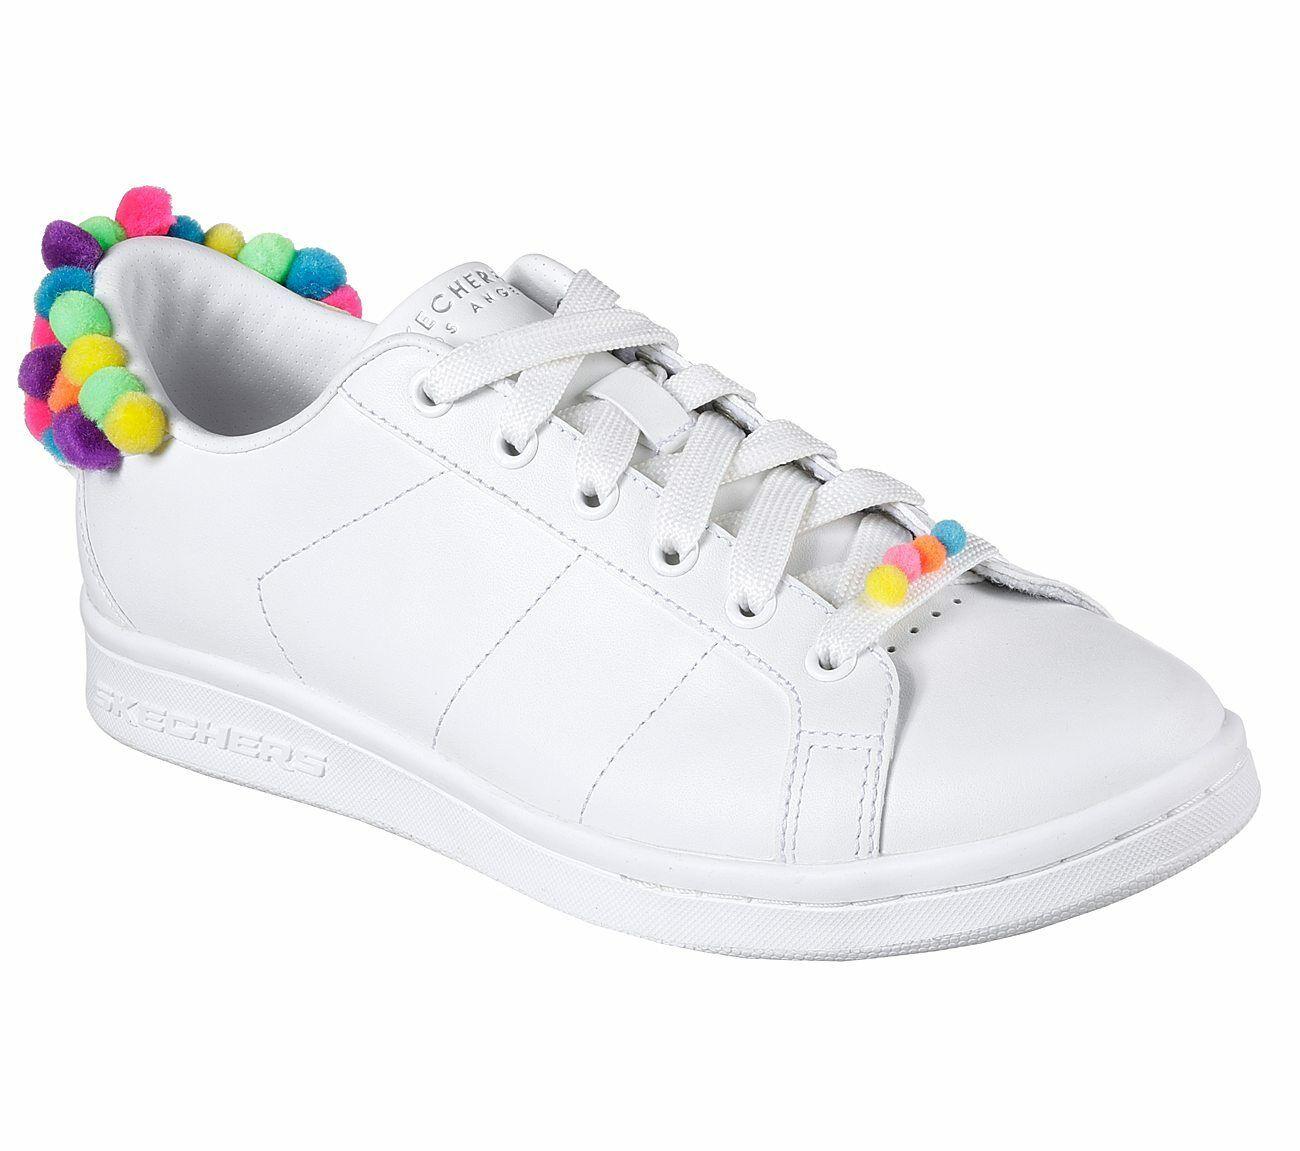 SKECHERS Street Womens Omne - GUM BALLS White Smooth leather Sneakers Size US 9 - SVNYFancy